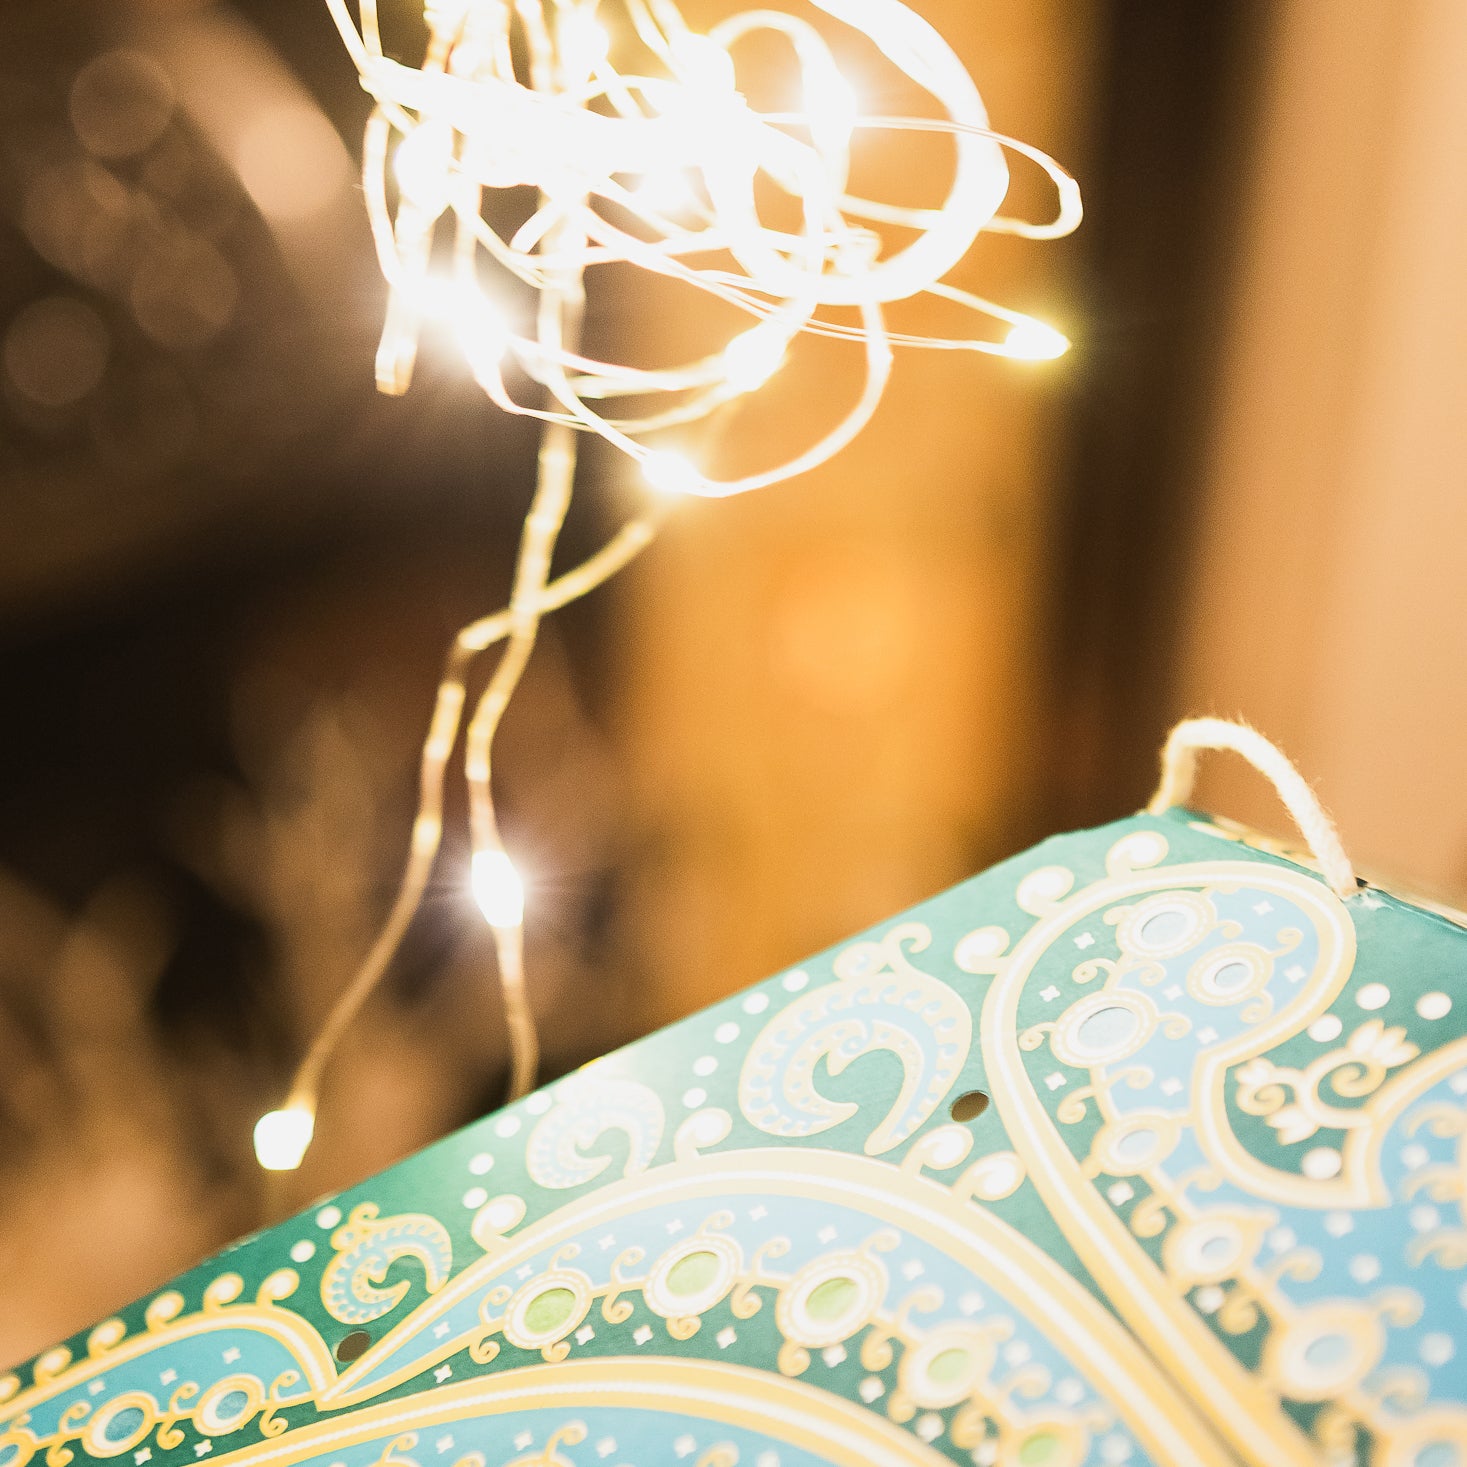 How to Use Fairy Lights in a Star Lantern